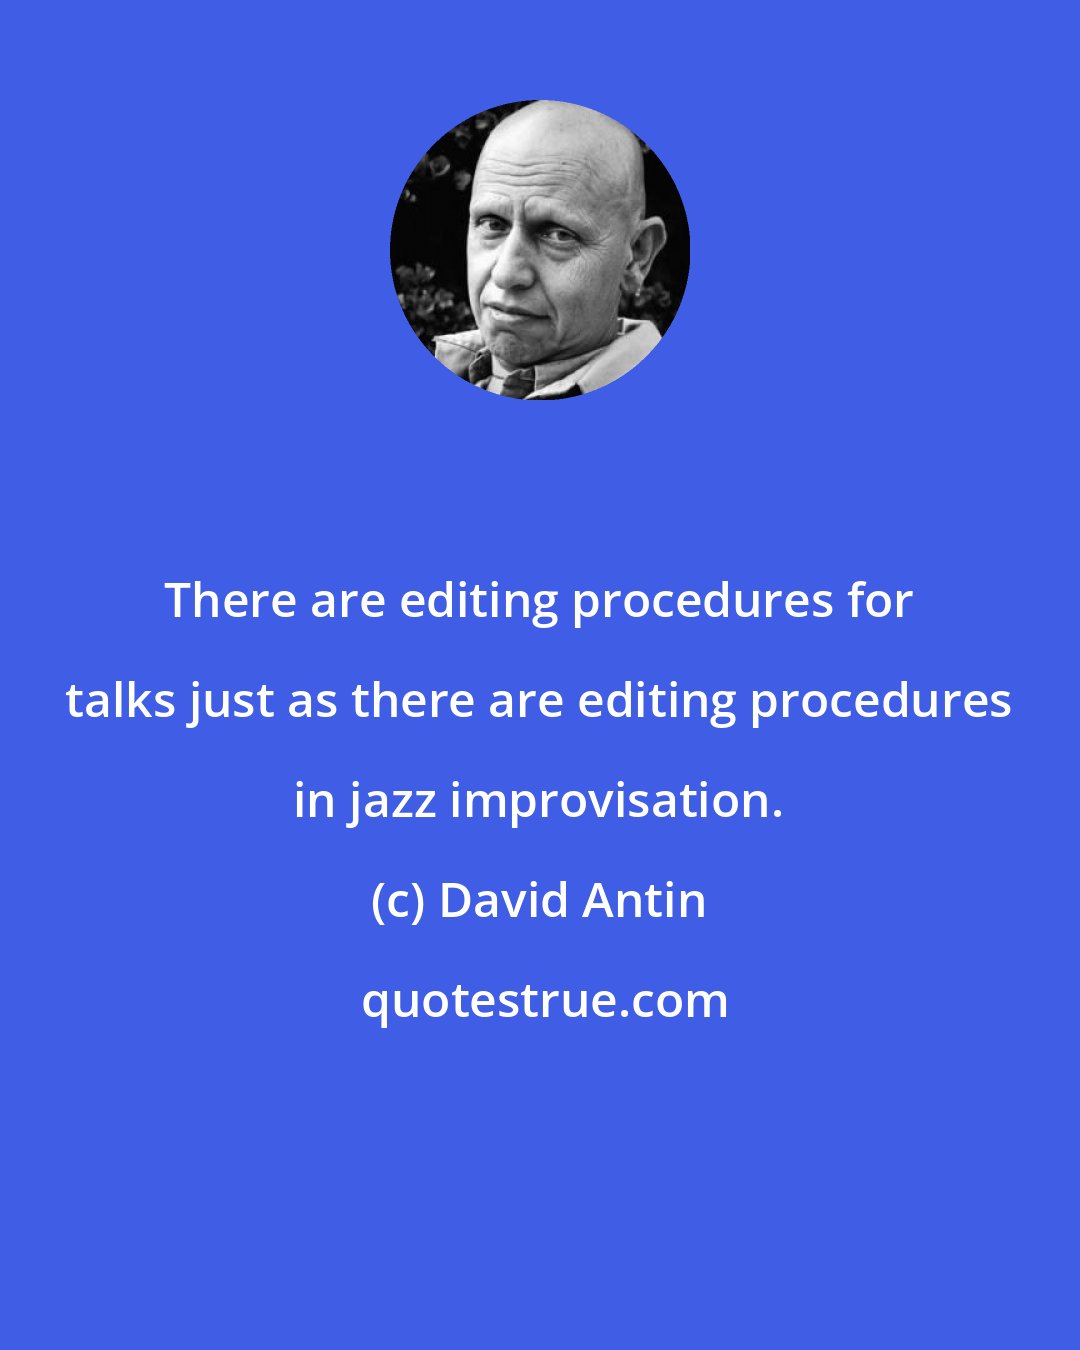 David Antin: There are editing procedures for talks just as there are editing procedures in jazz improvisation.